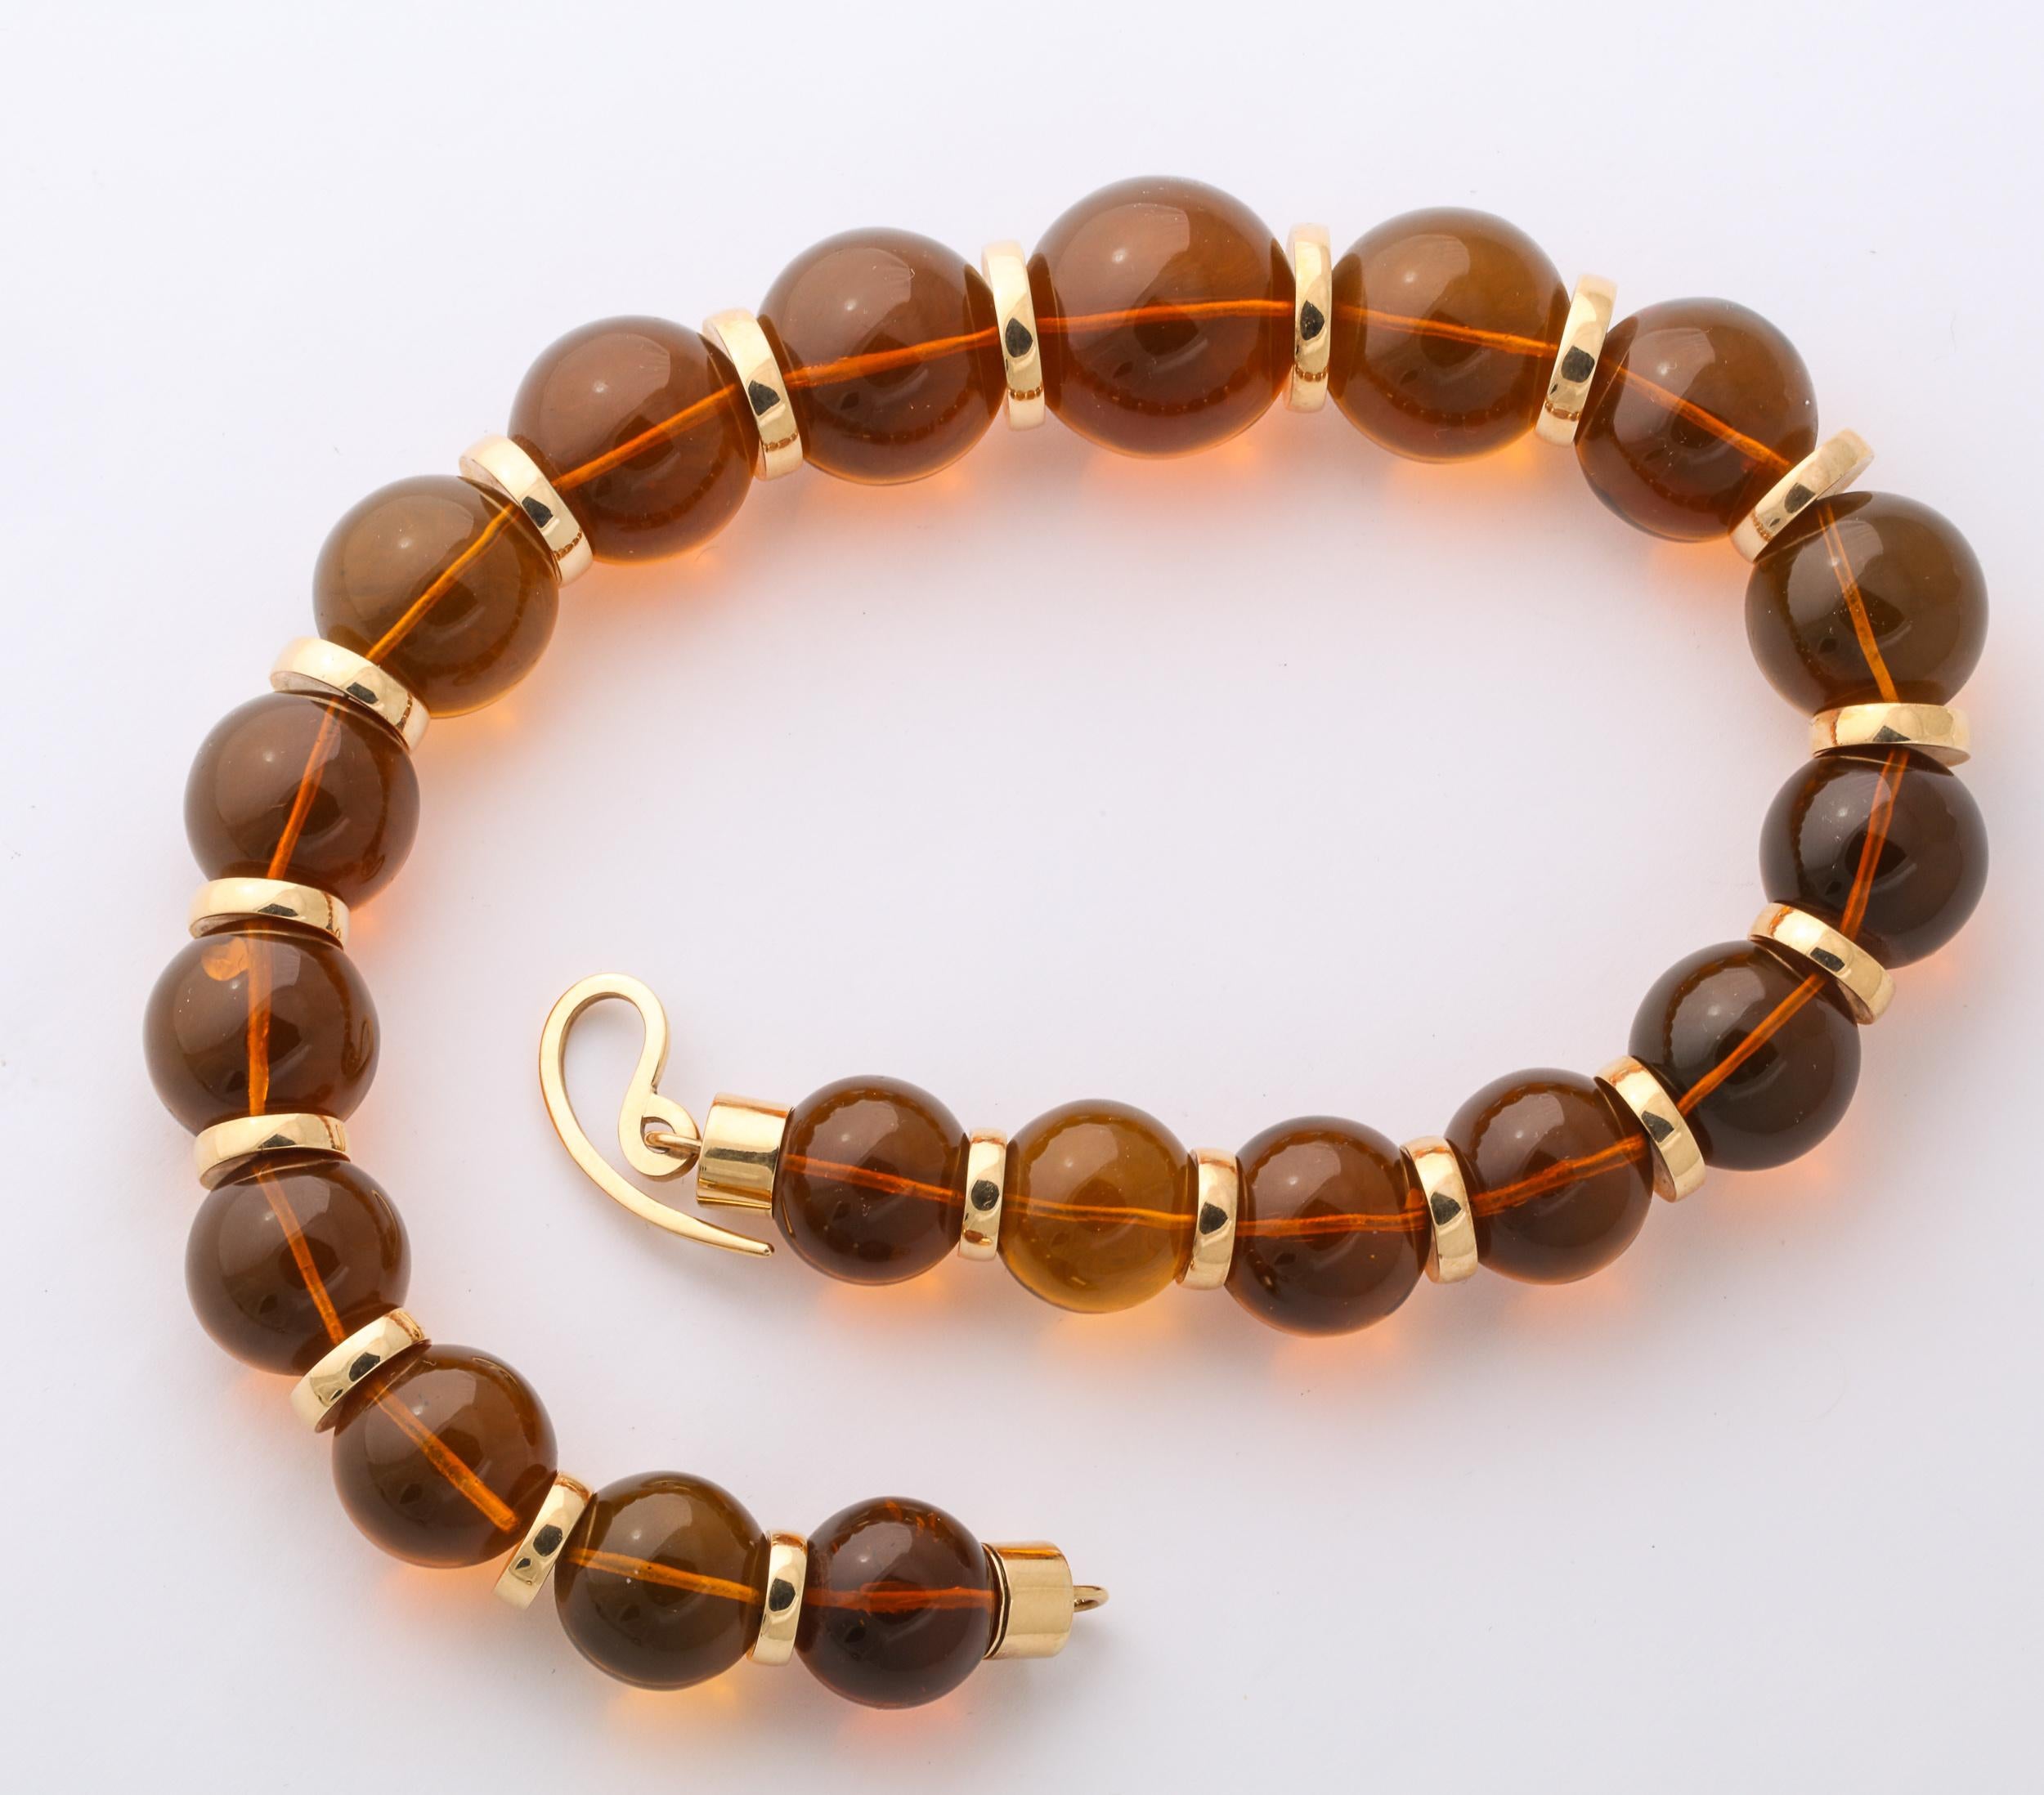 Magnificent reconstituted  polished  Amber Beads ranging from 18 to 25 mm - and separated by 18t Yellow Gold Rondels measuring from  11 to 16 mm x 3 mm
The Beads are terminated by cylindrical ends  and a free-form 18kt Yellow Gold Clasp.
Very bold